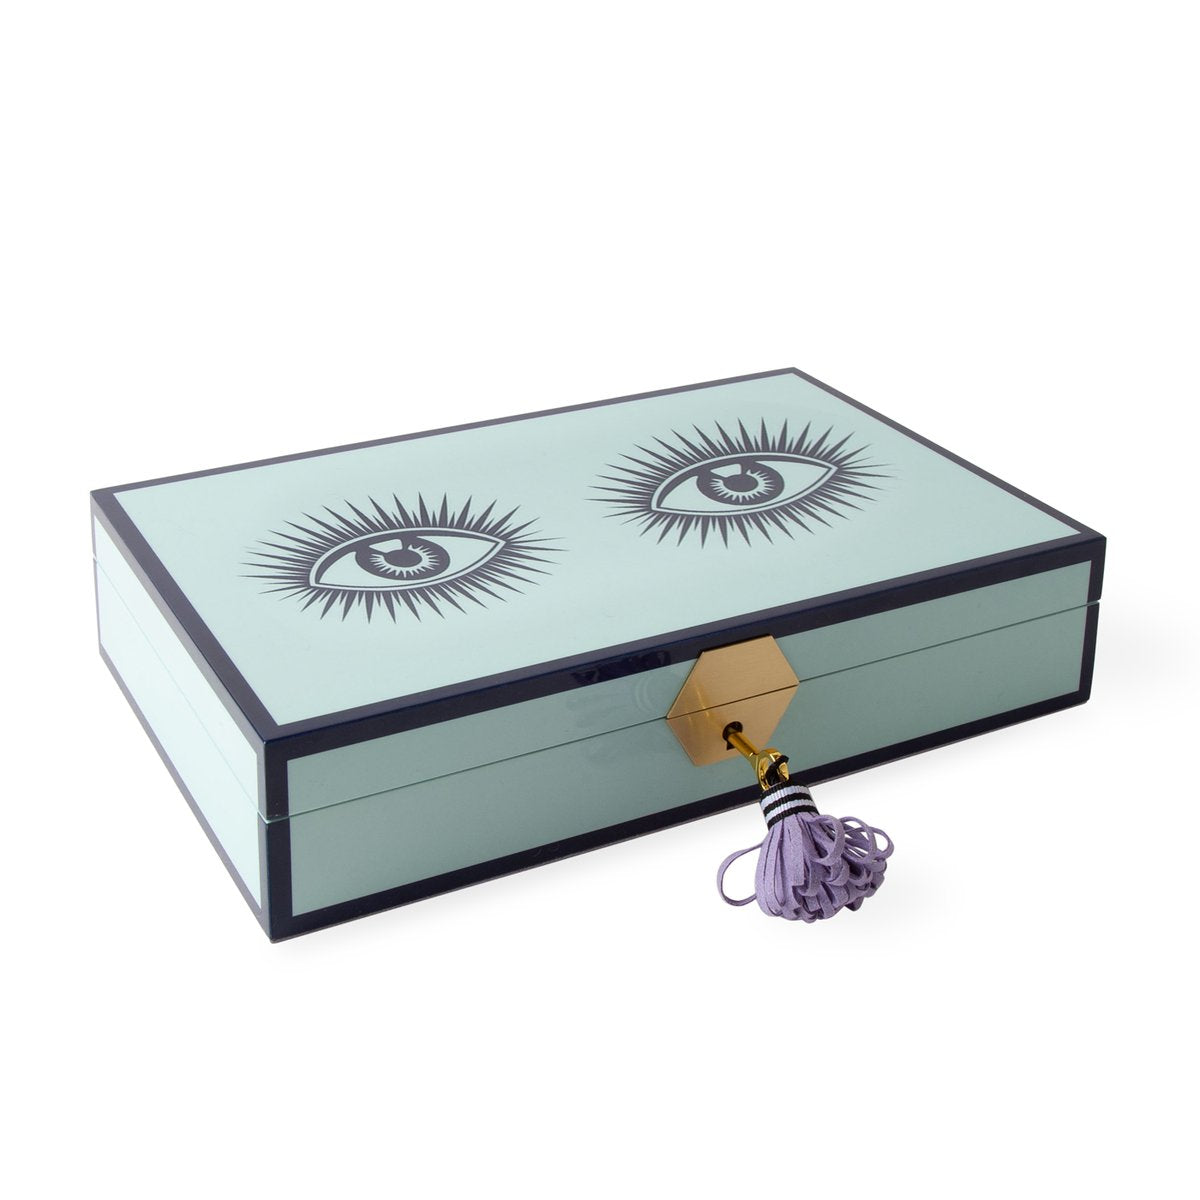 Le Wink Lacquer Jewelry Box by Jonathan Adler